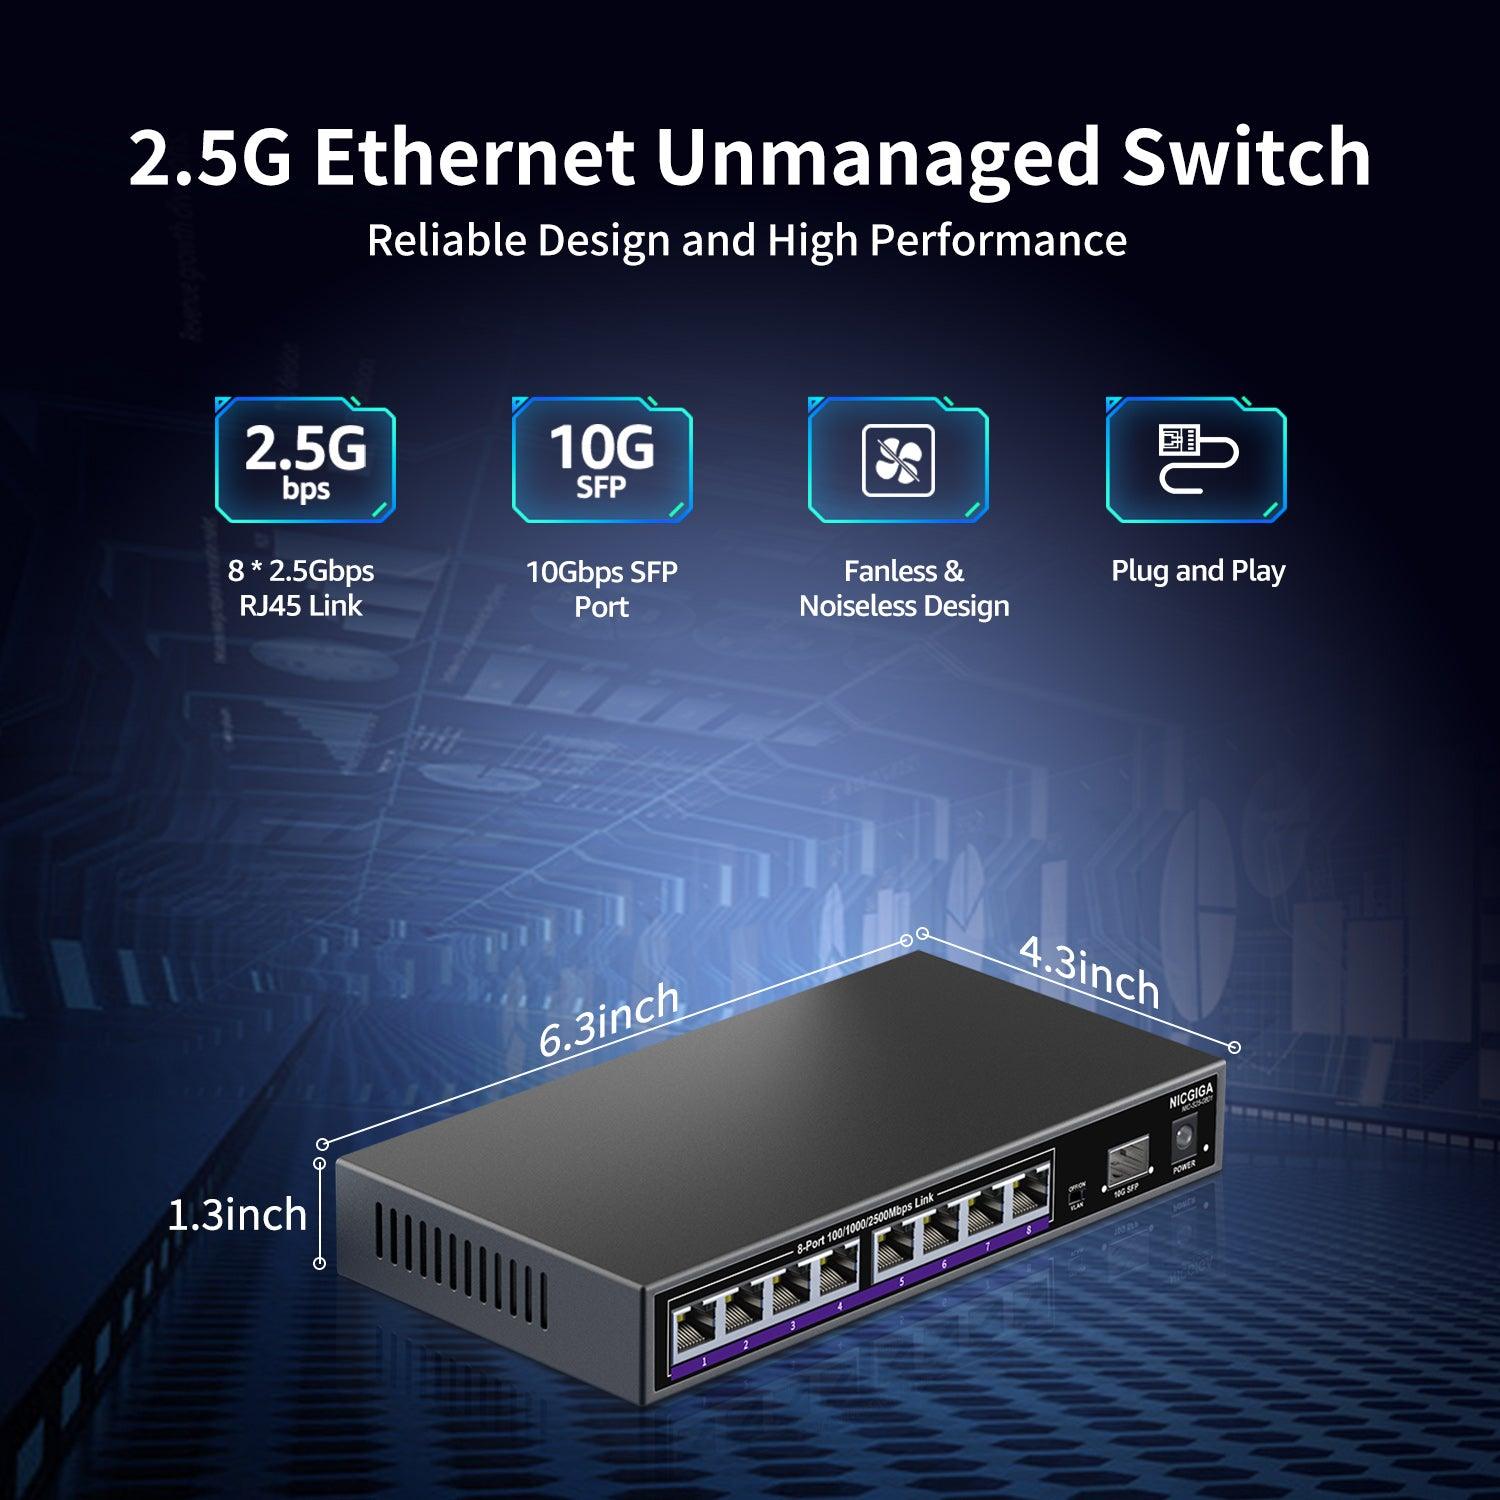 10gbe L2 Managed Switch - 8x 10gbps Poe+ Ports, Vlan Support, 160g Capacity